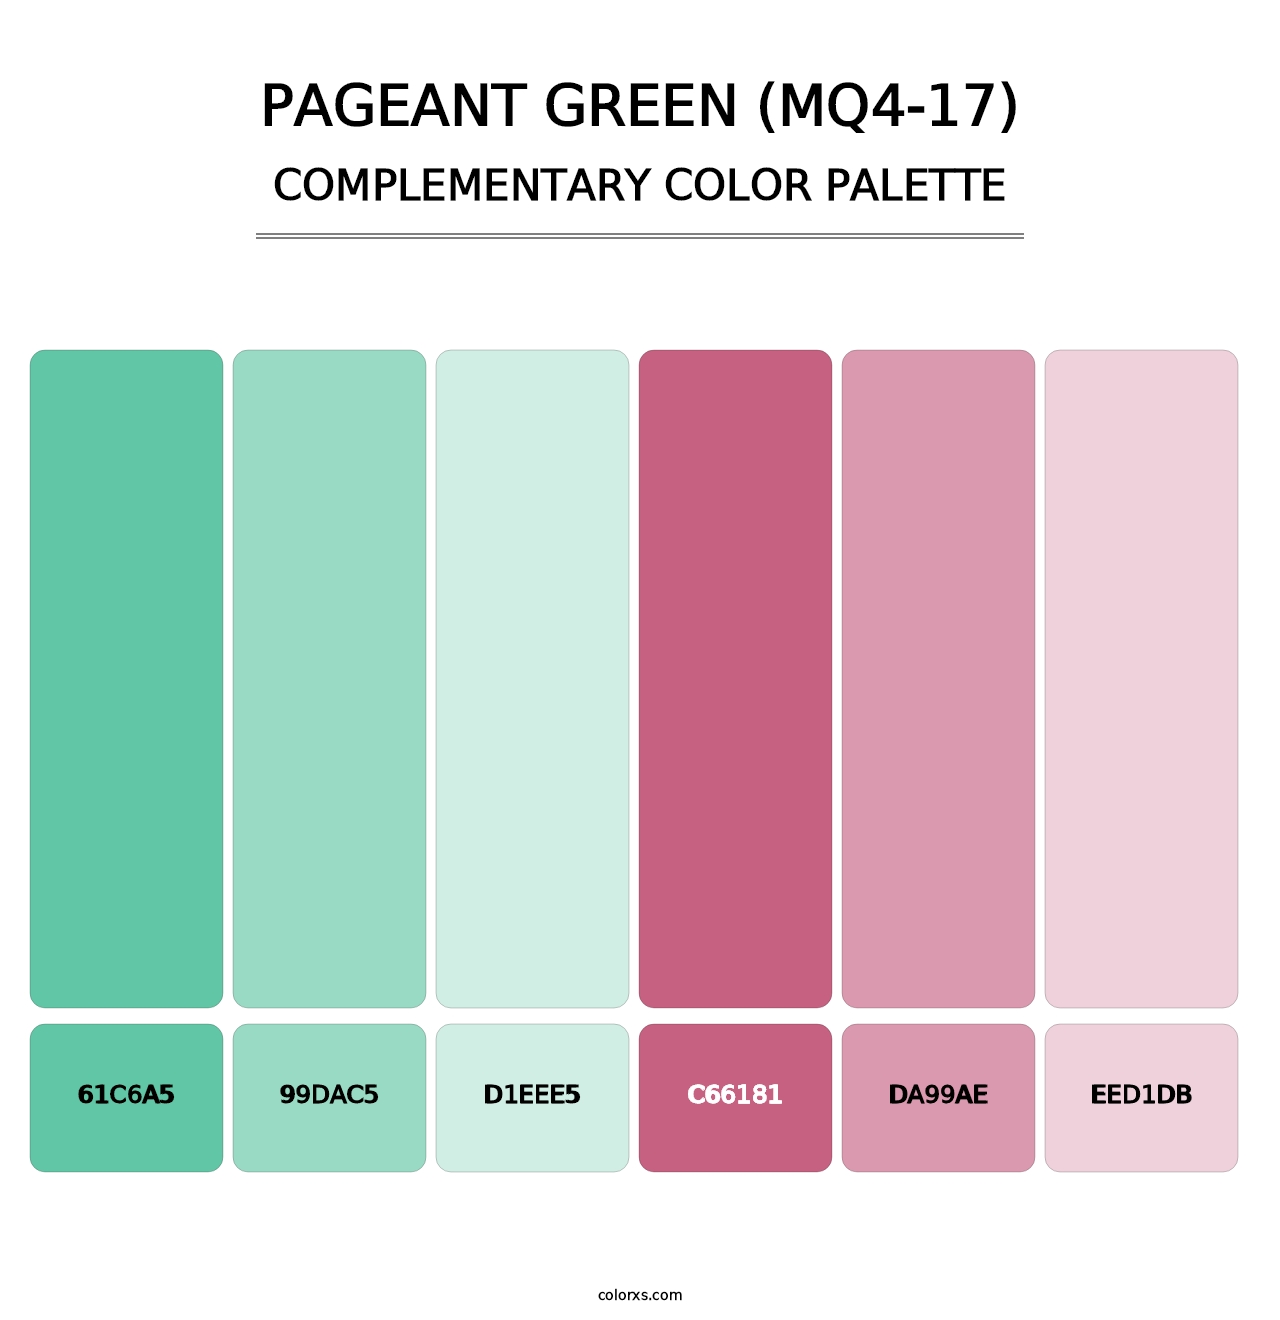 Pageant Green (MQ4-17) - Complementary Color Palette